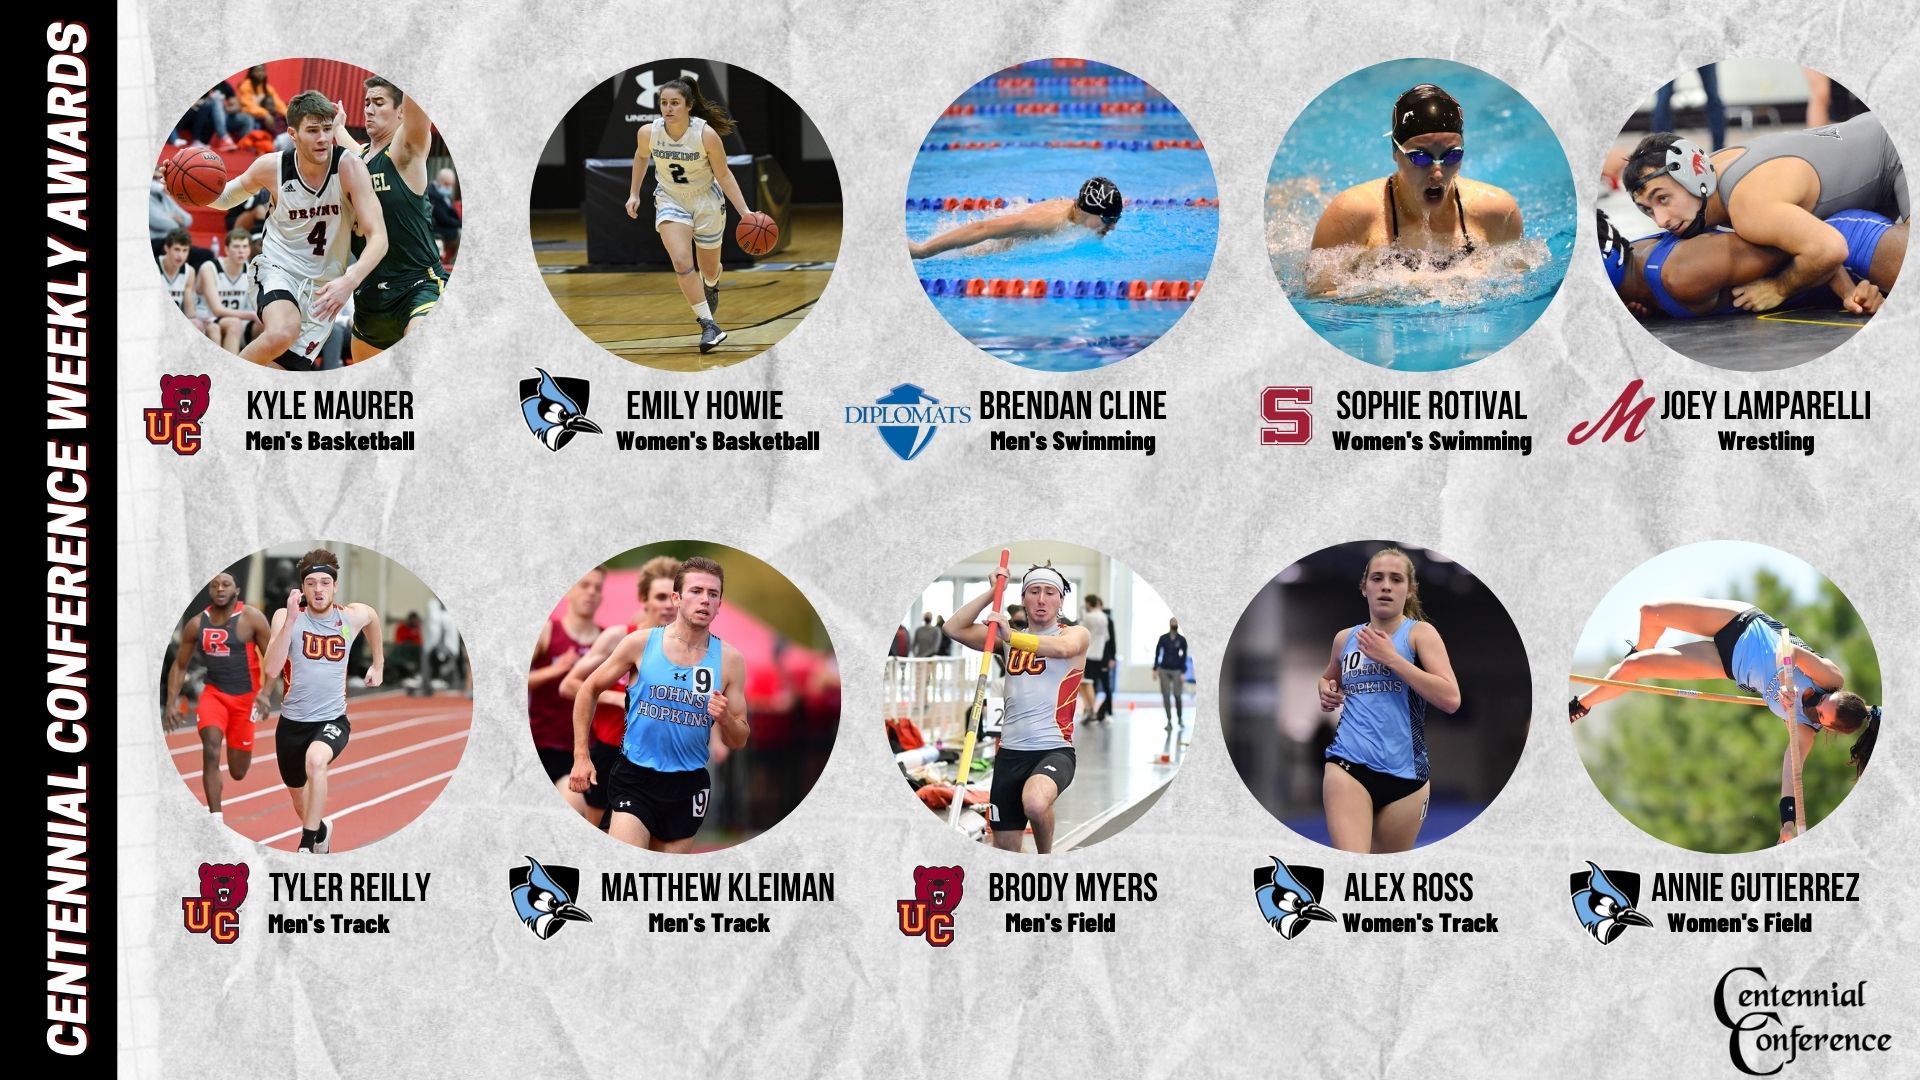 Centennial Conference Athletes of the Week - Nov. 15-21